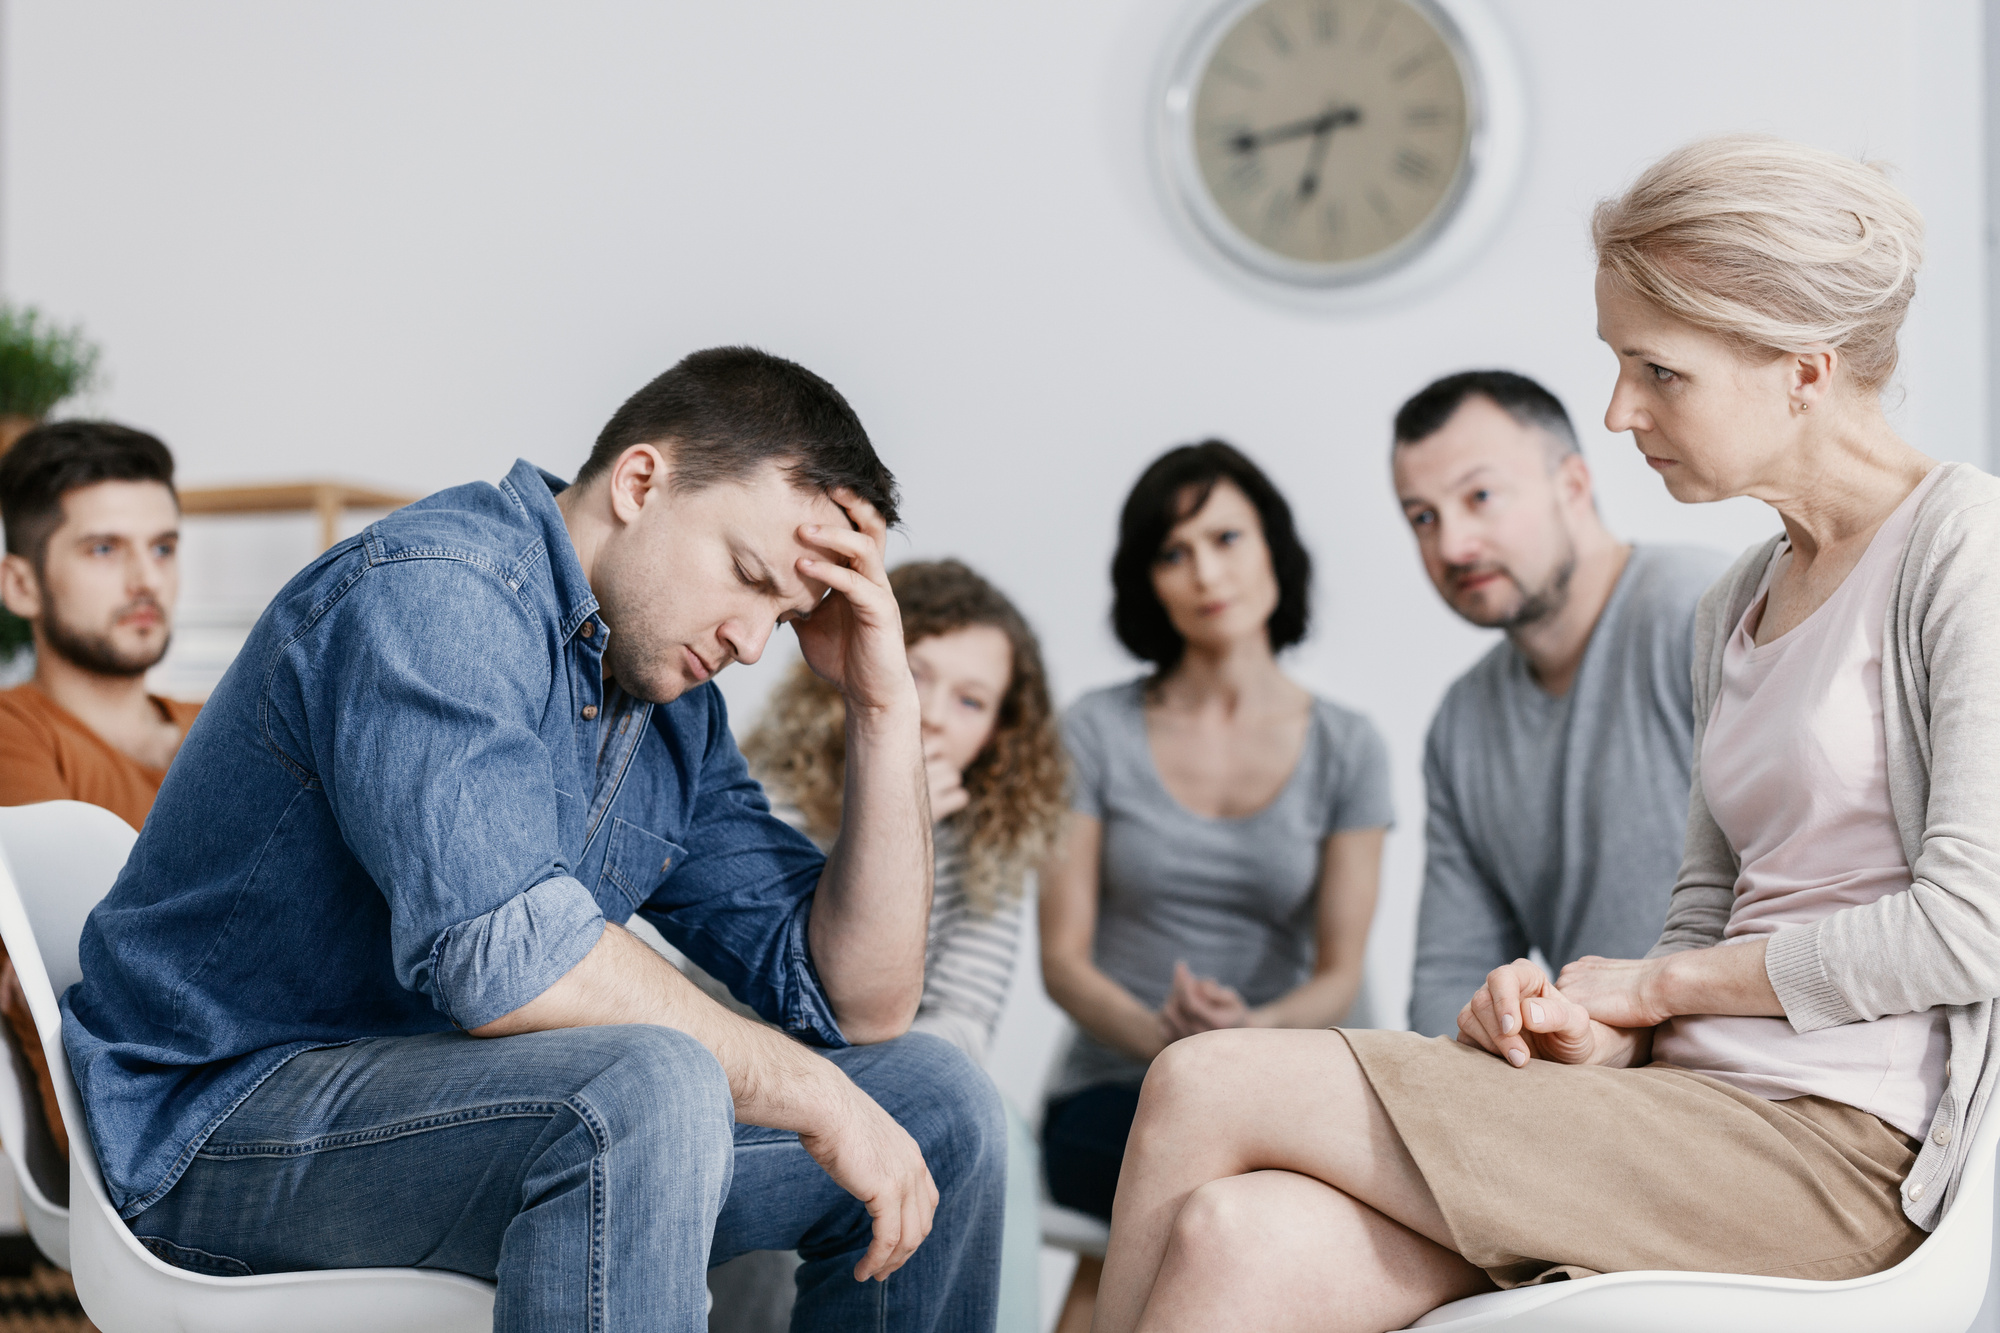 Types and Benefits of Outpatient Addiction Treatment